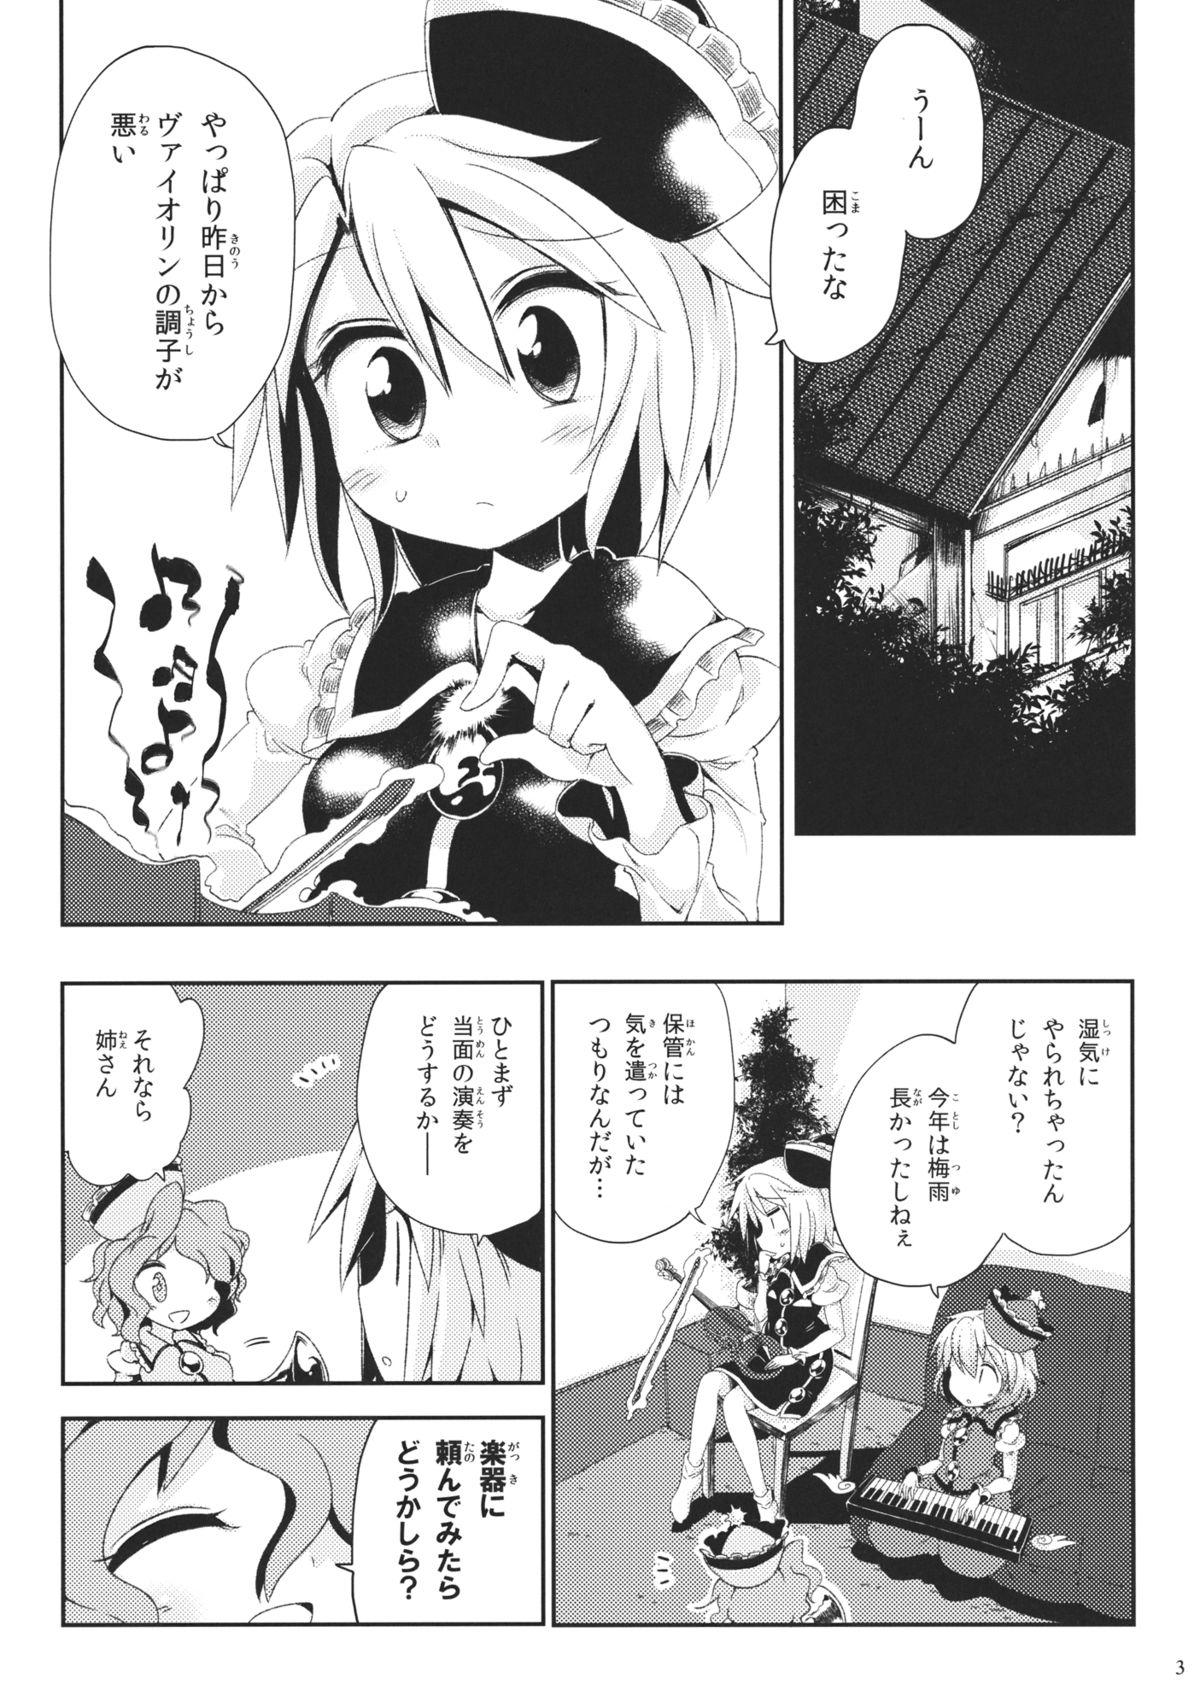 Sesso Alternate Modulation - Touhou project Polla - Page 2